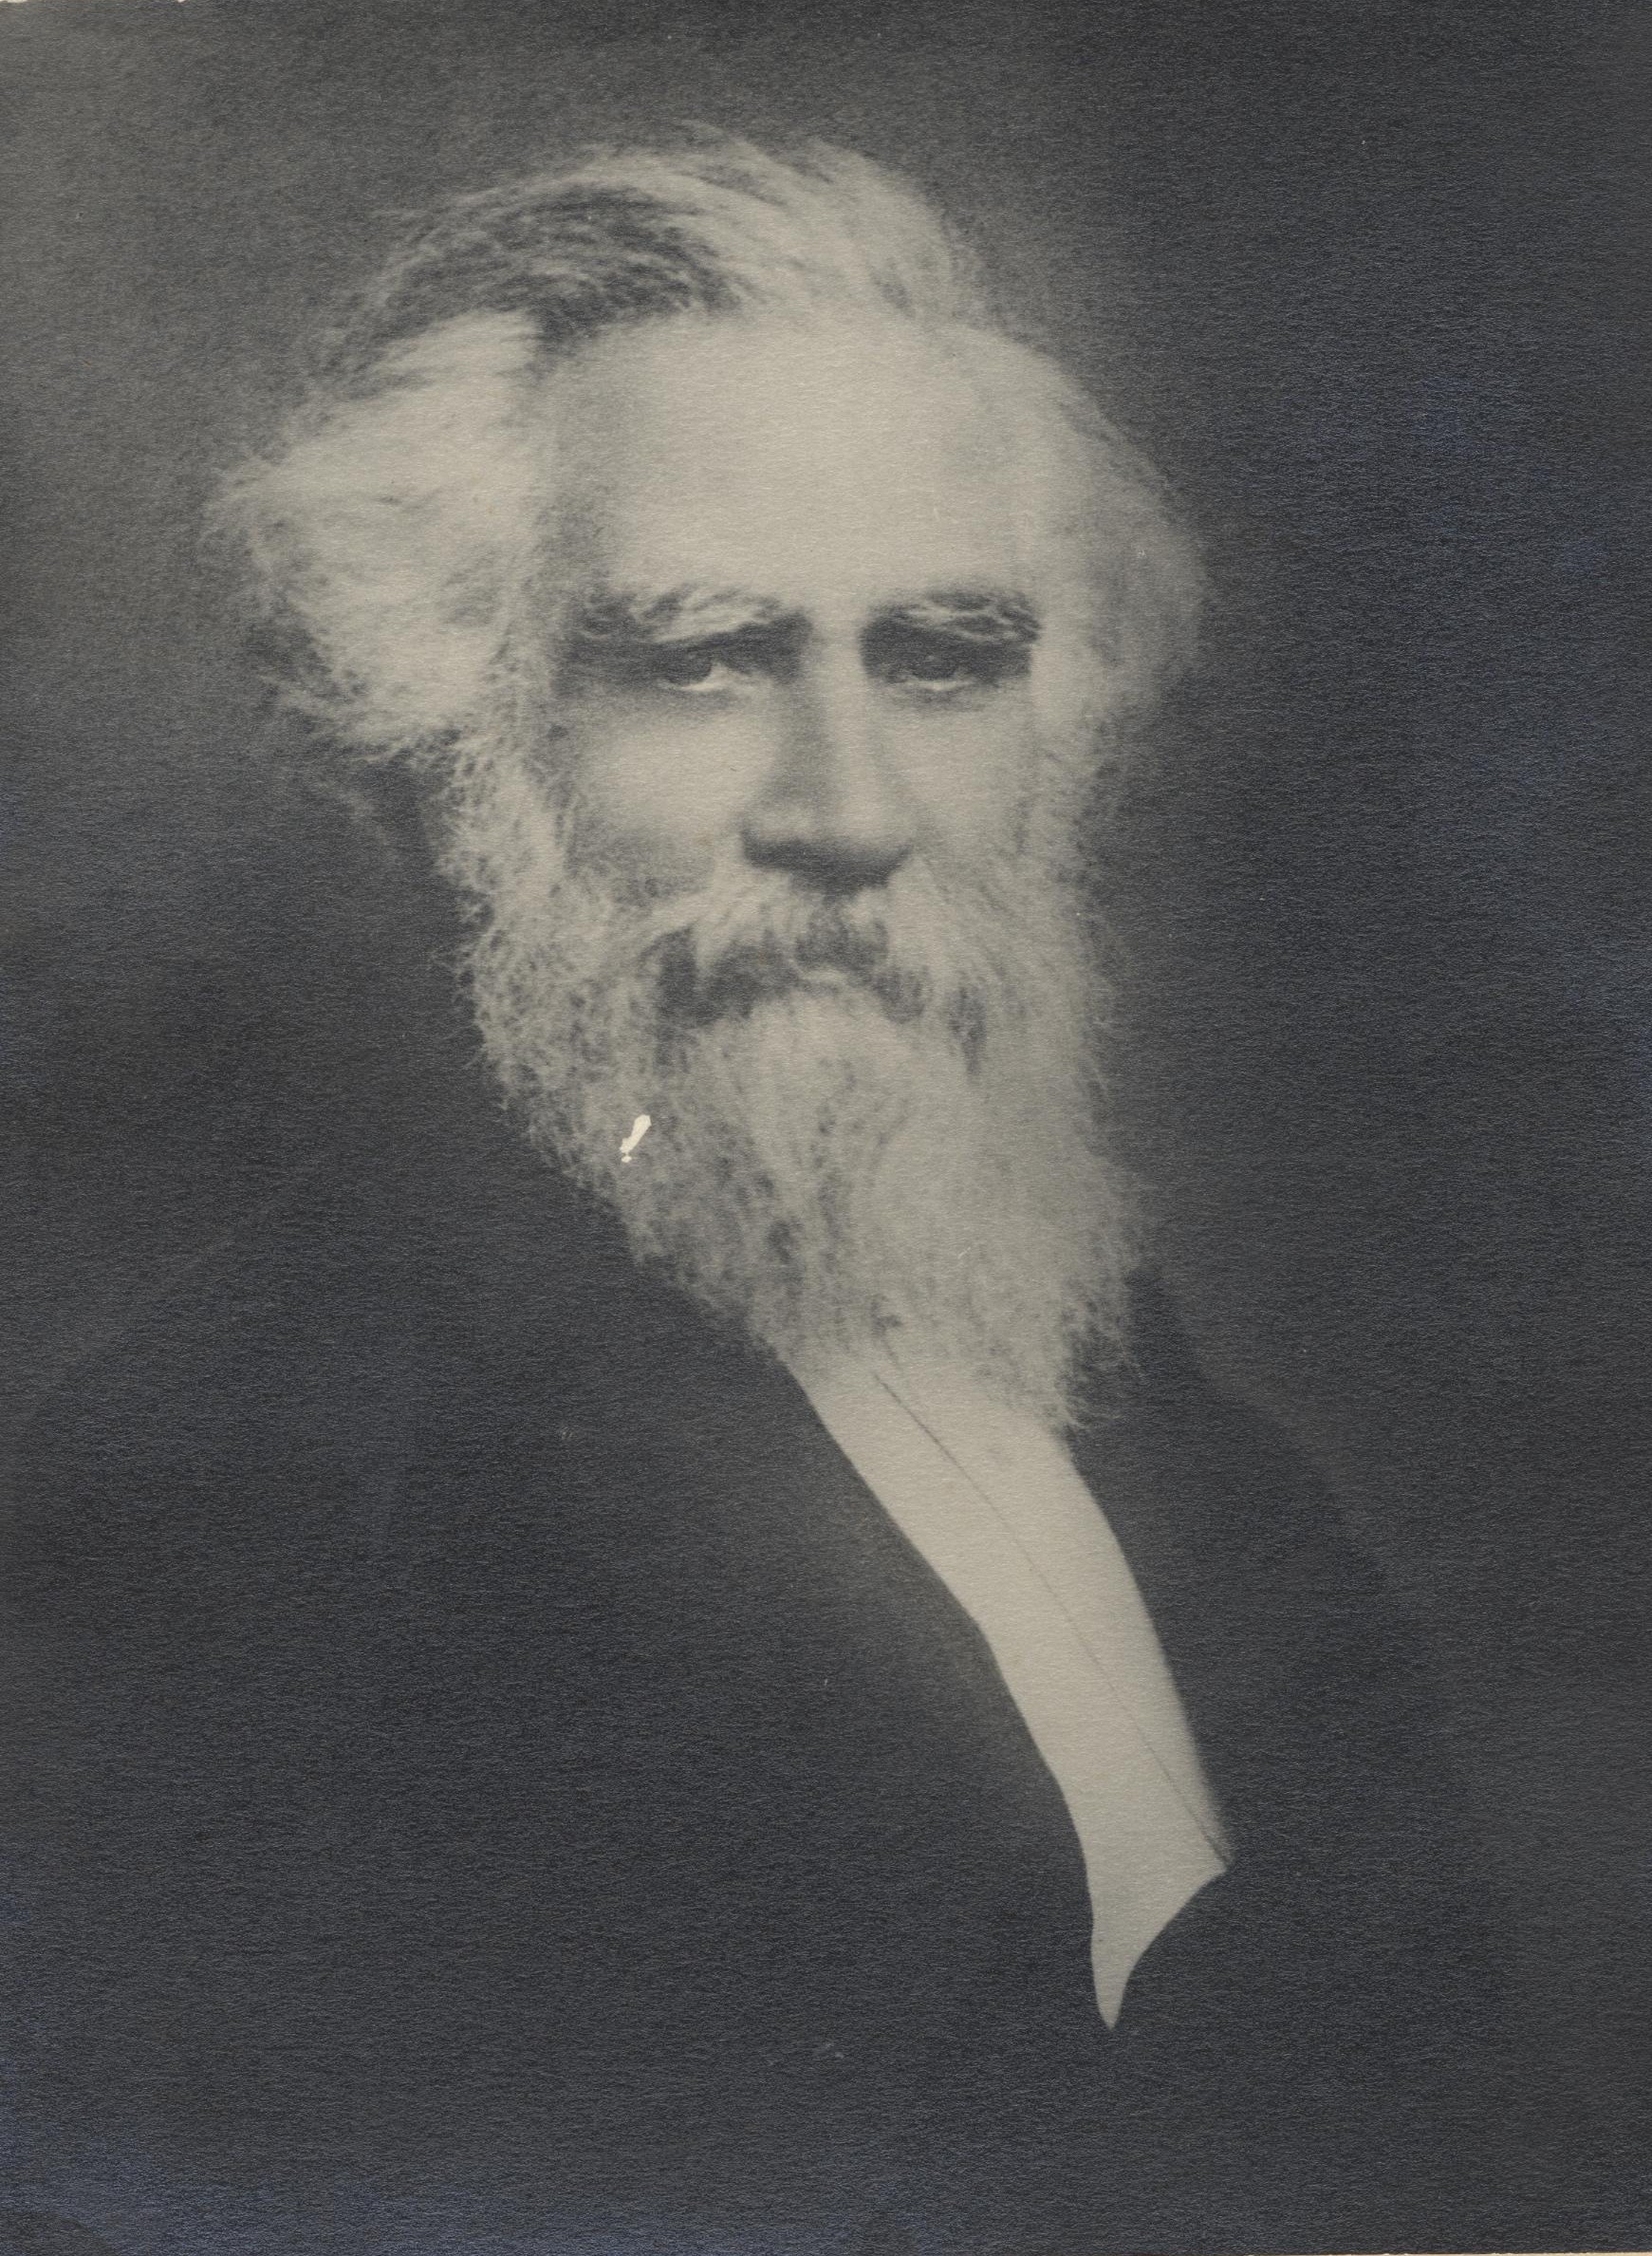 Image shows Passmore Edwards as an older man with long white beard and white hair